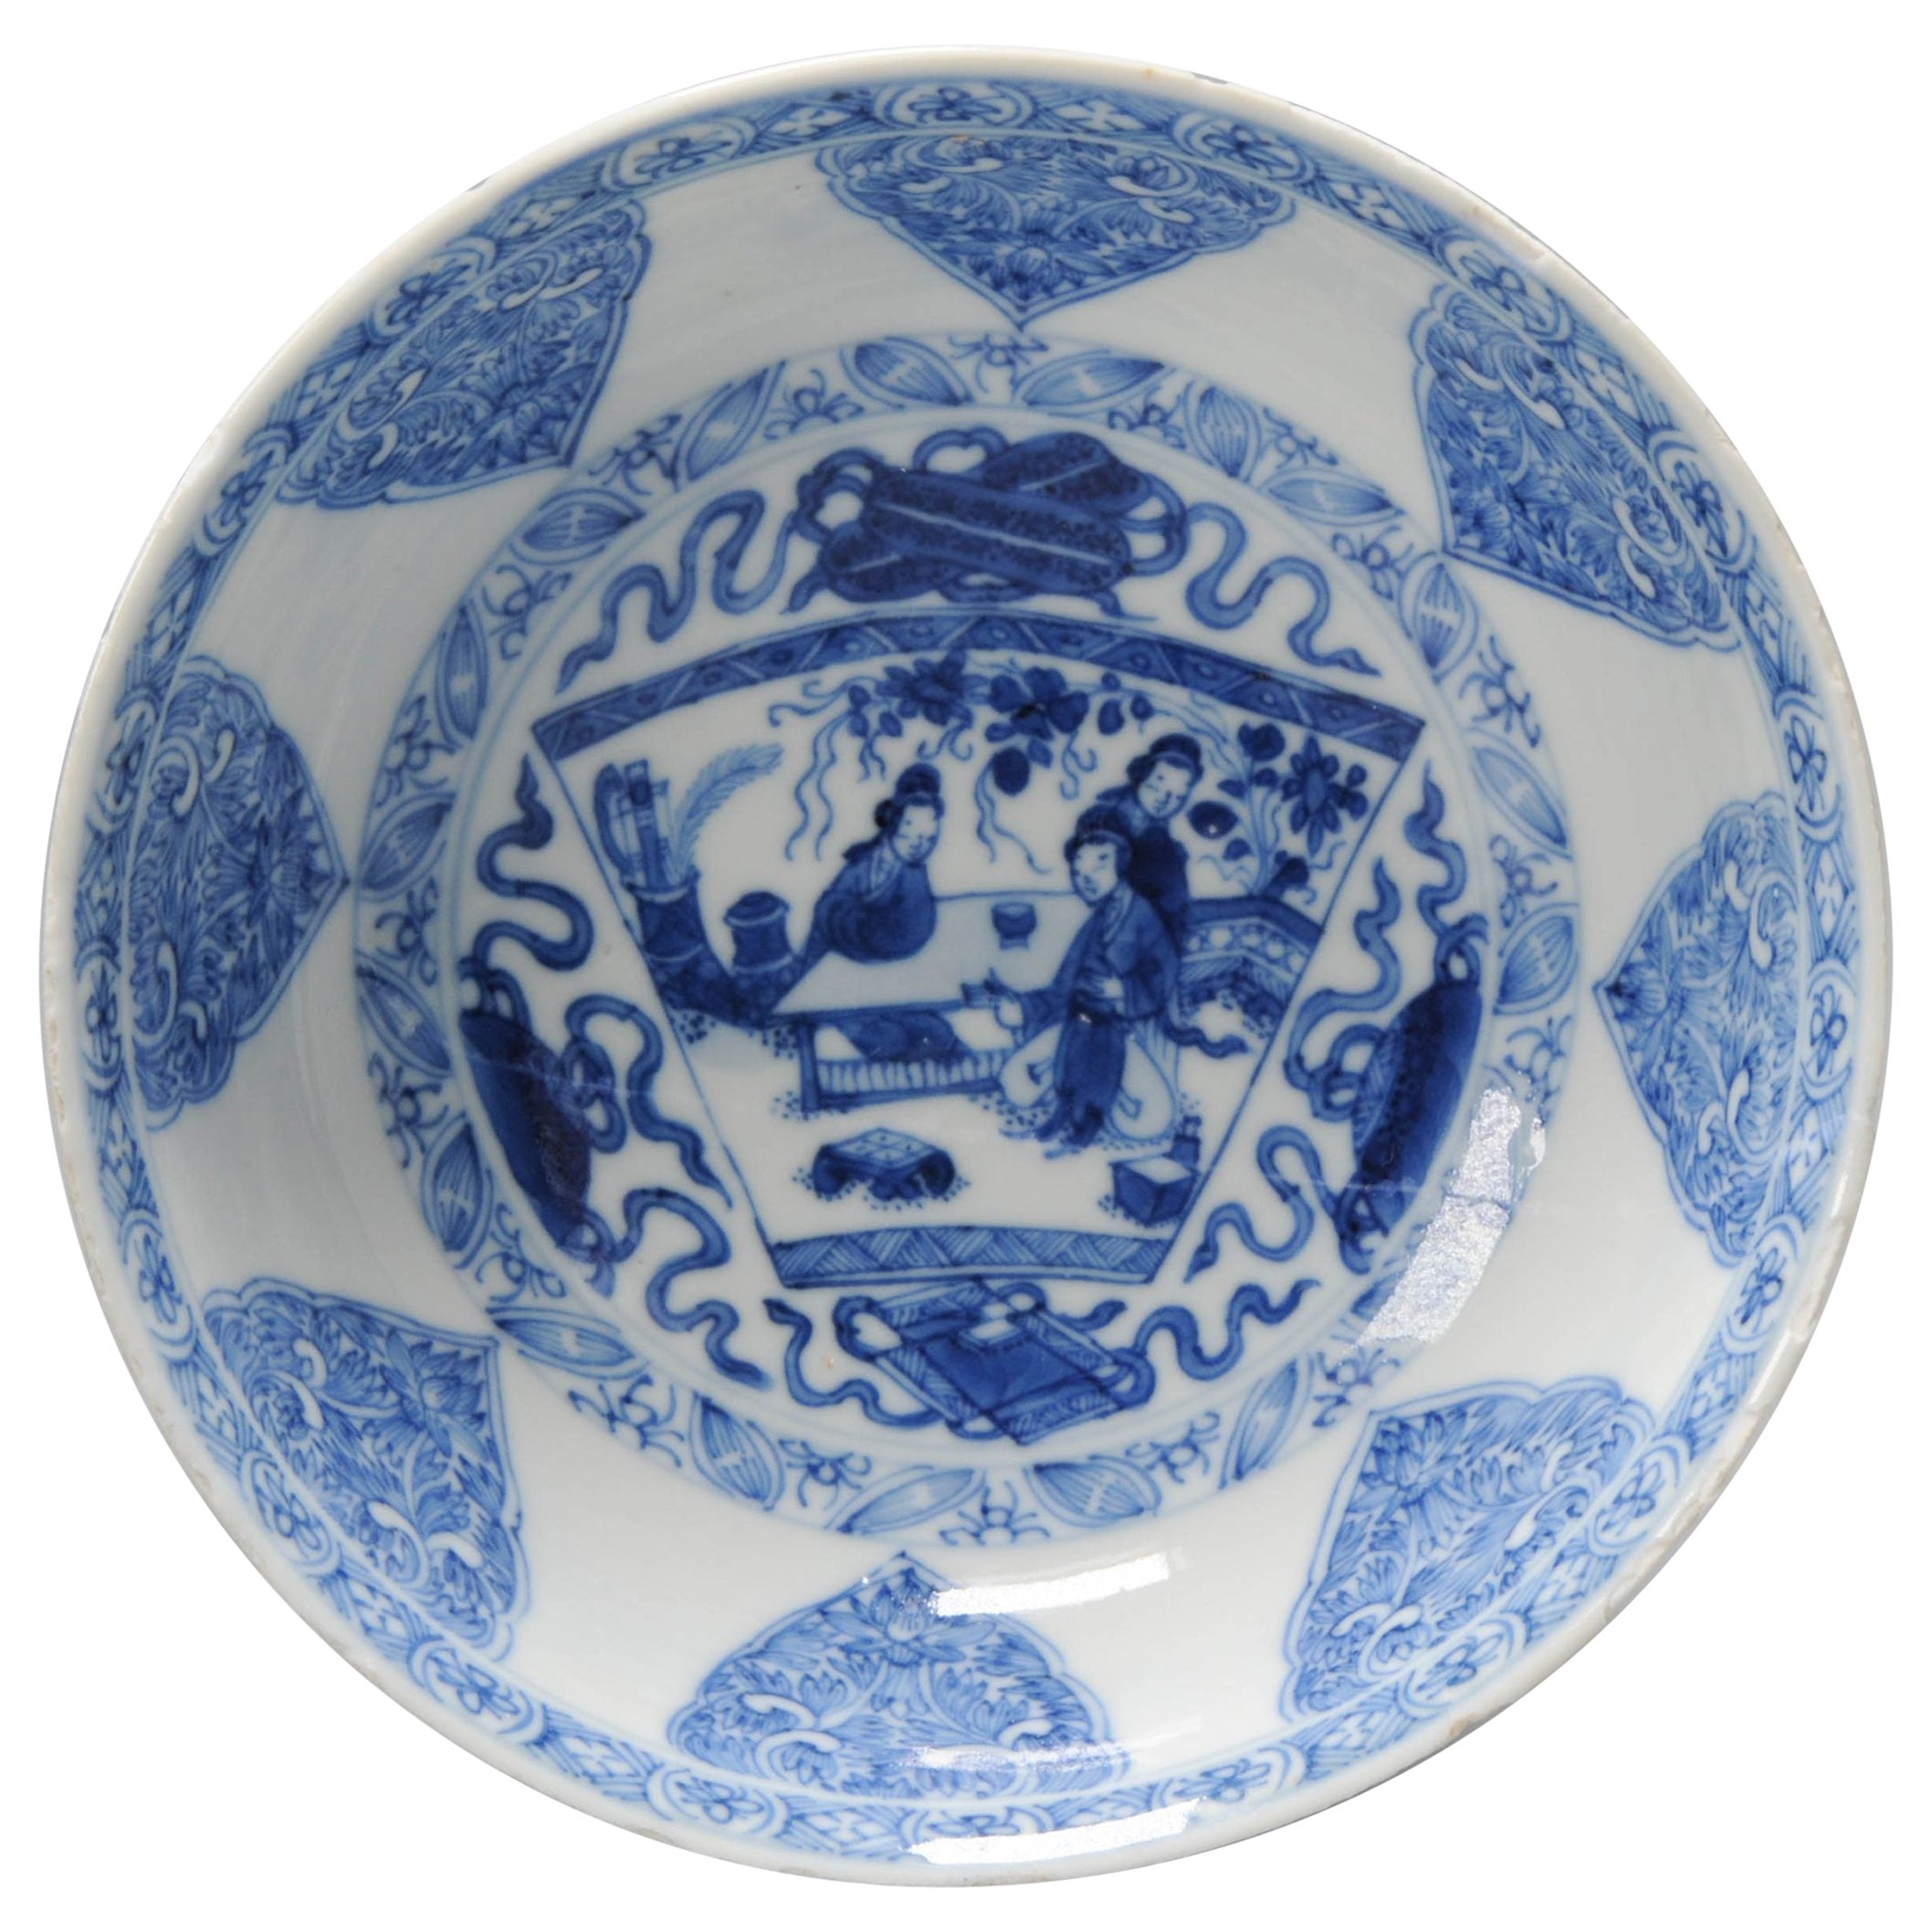 Top Quality Kangxi Antique Chinese Porcelain Shallow Bowl Lizas, 17th /18th Cen For Sale